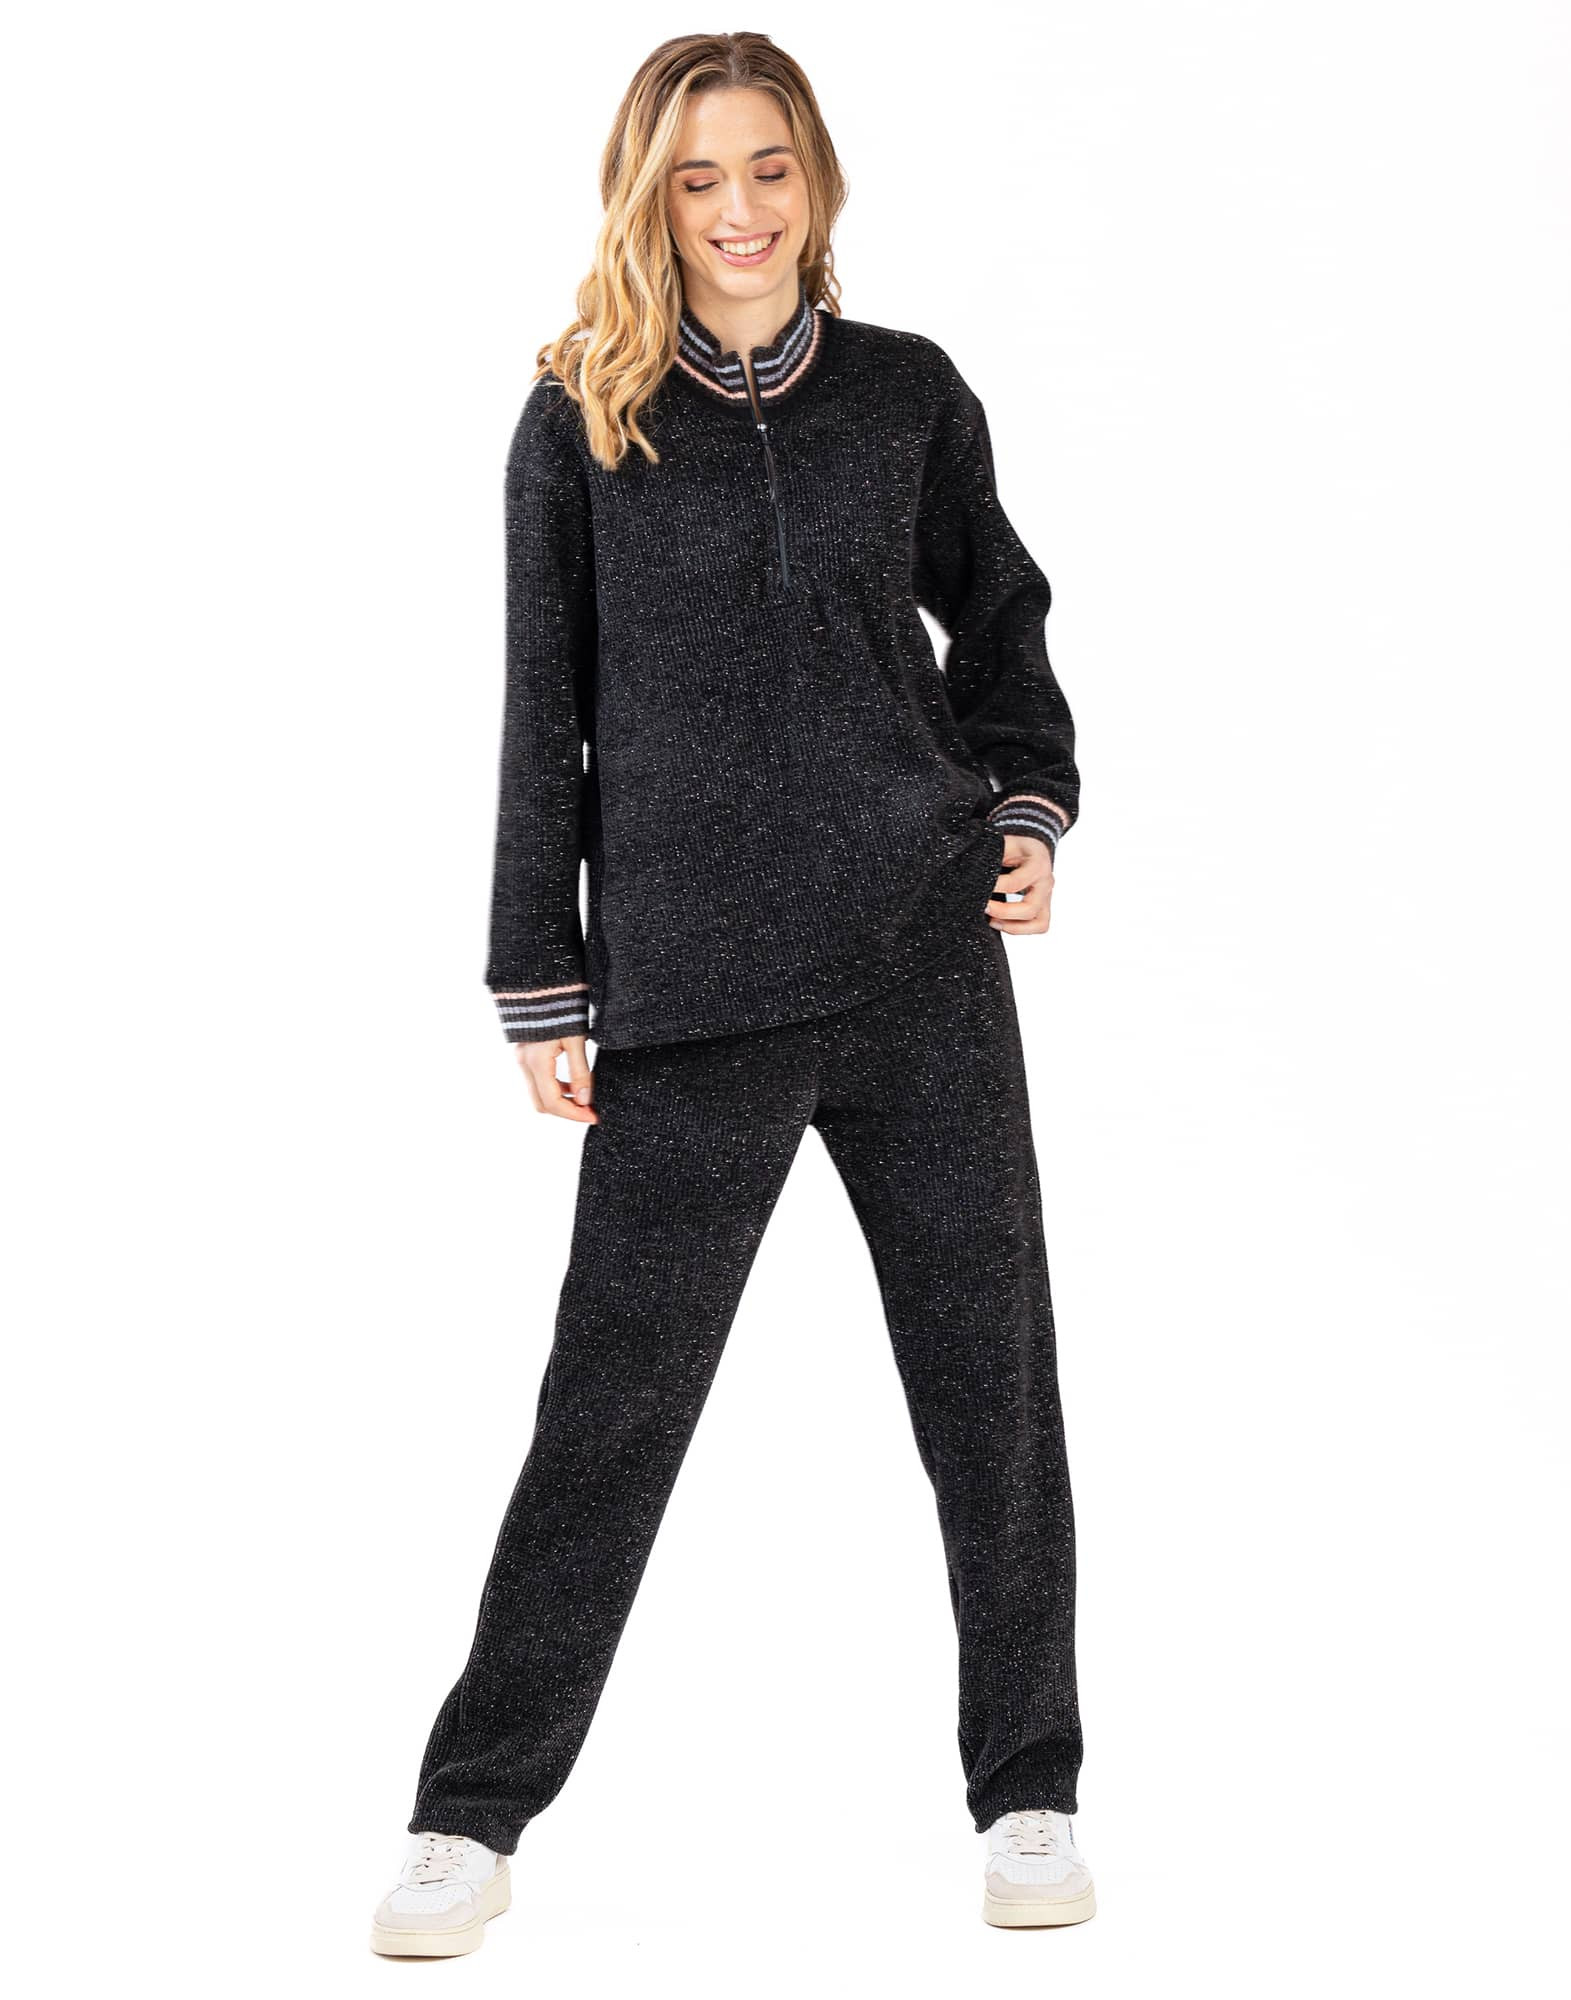 Tracksuit in chenille knit with lurex ICONIC 602 black